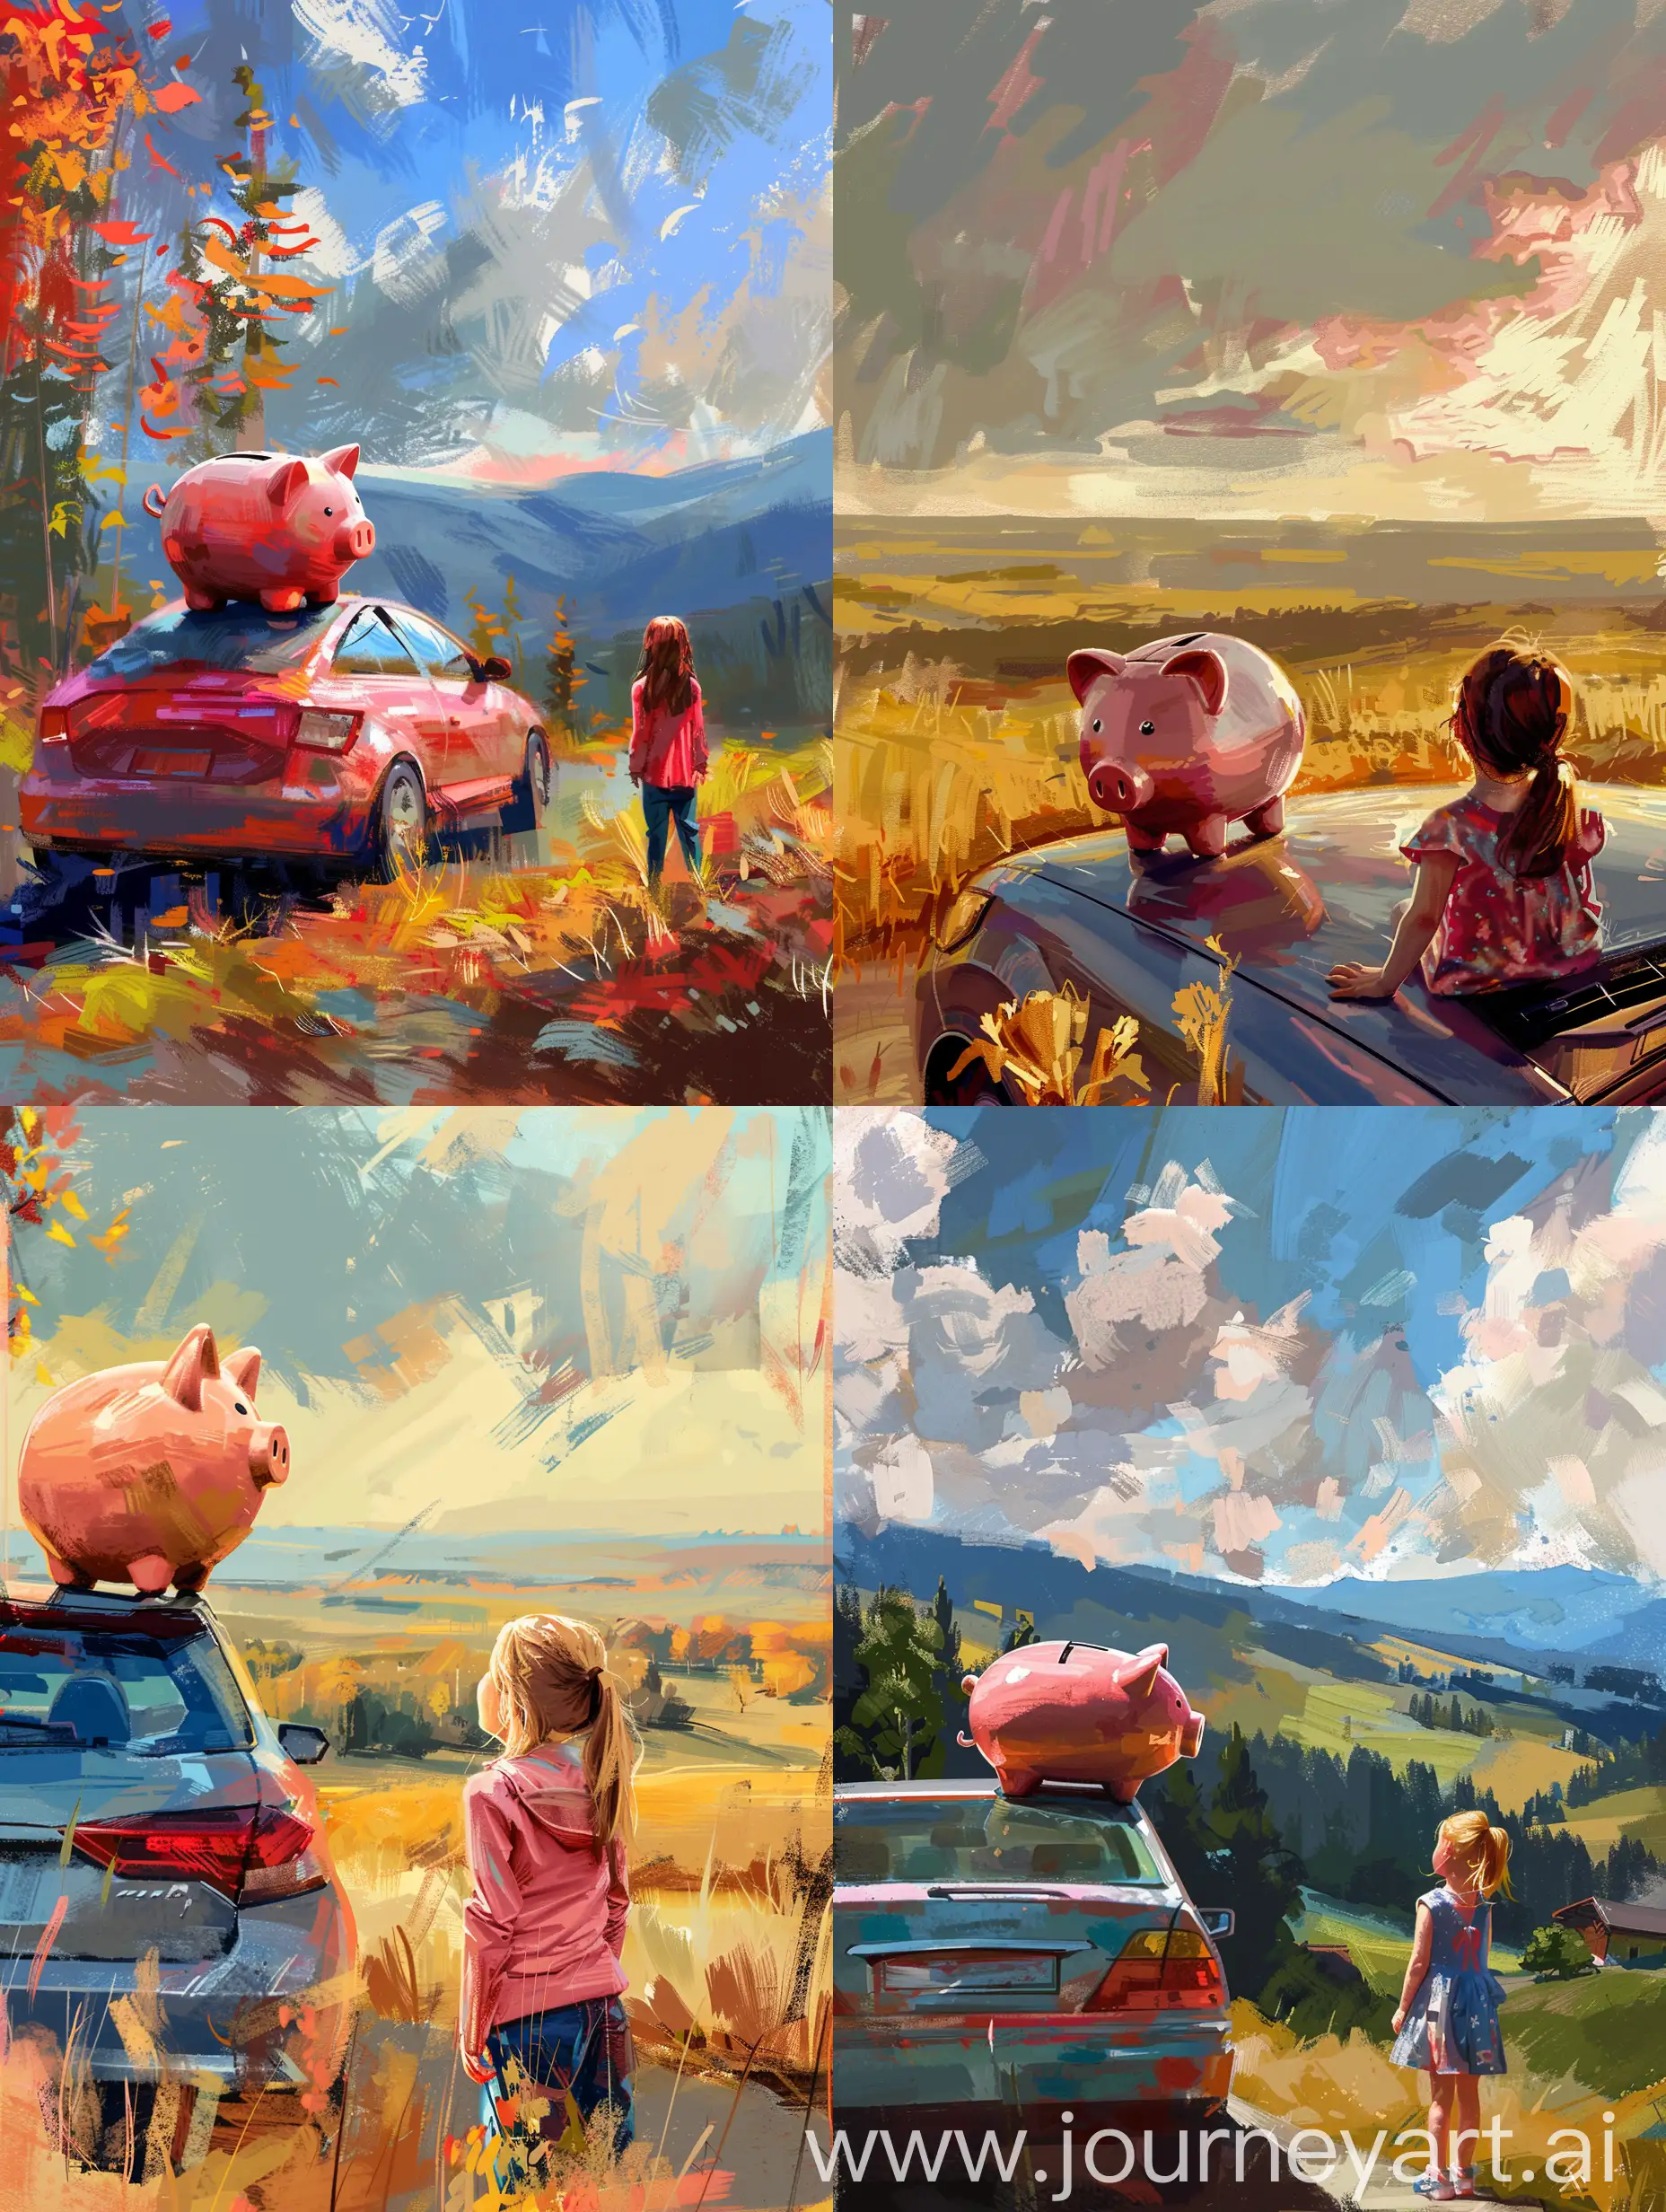 Girl-Admiring-Landscape-with-Piggy-Bank-on-Car-Digital-Drawing-with-Oil-Stylization